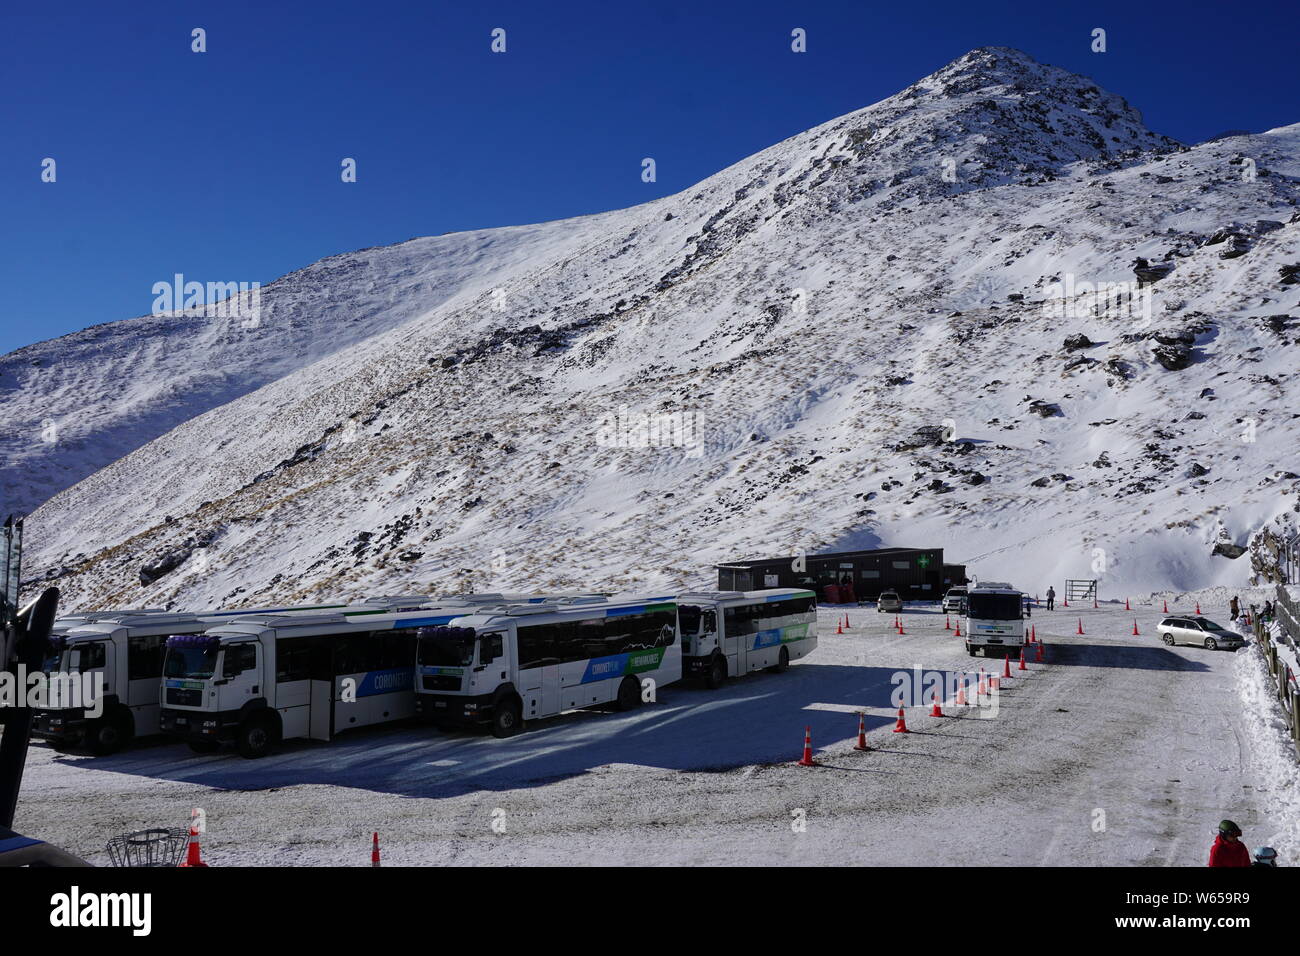 New Zealand: 18 Jun 19: Remarkable ski field heavy snow thick layer on top  mountain people ski with snowboard and lift beautiful vacation winter time  Stock Photo - Alamy